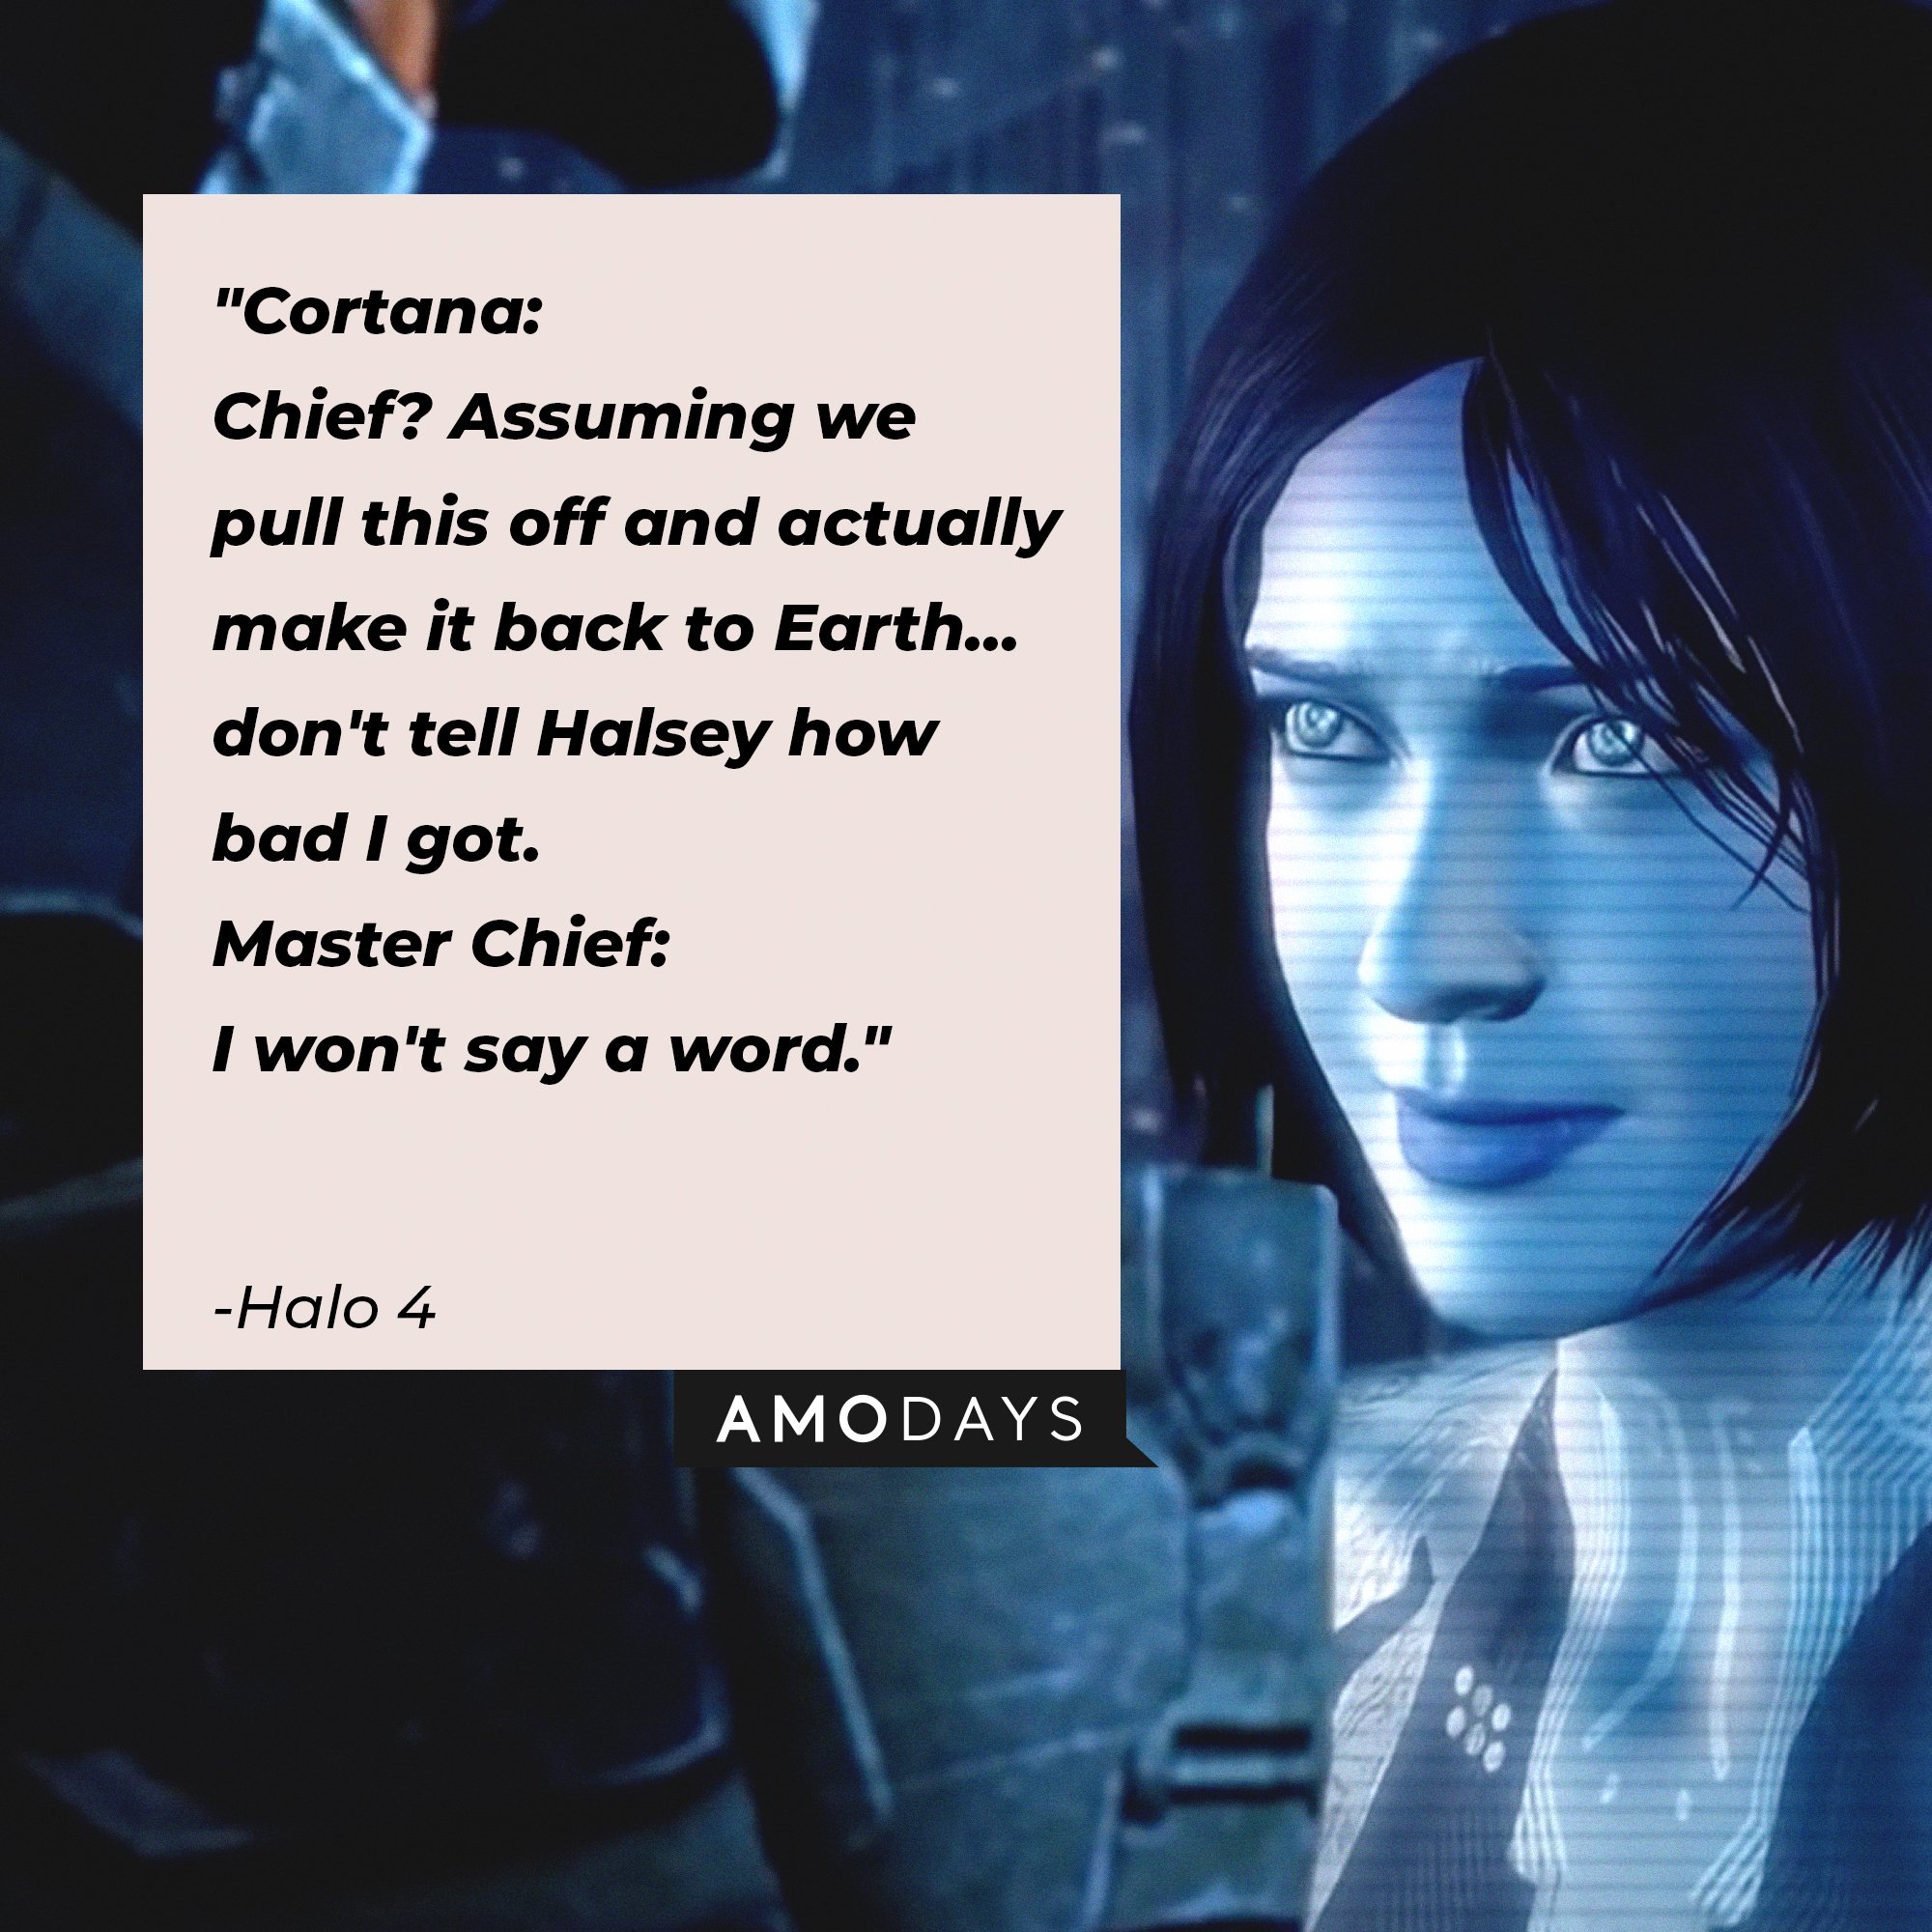 "Halo 4" quote: "Cortana: Chief? Assuming we pull this off, and actually make it back to Earth... don't tell Halsey how bad I got. / Master Chief: I won't say a word." | Image: AmoDays